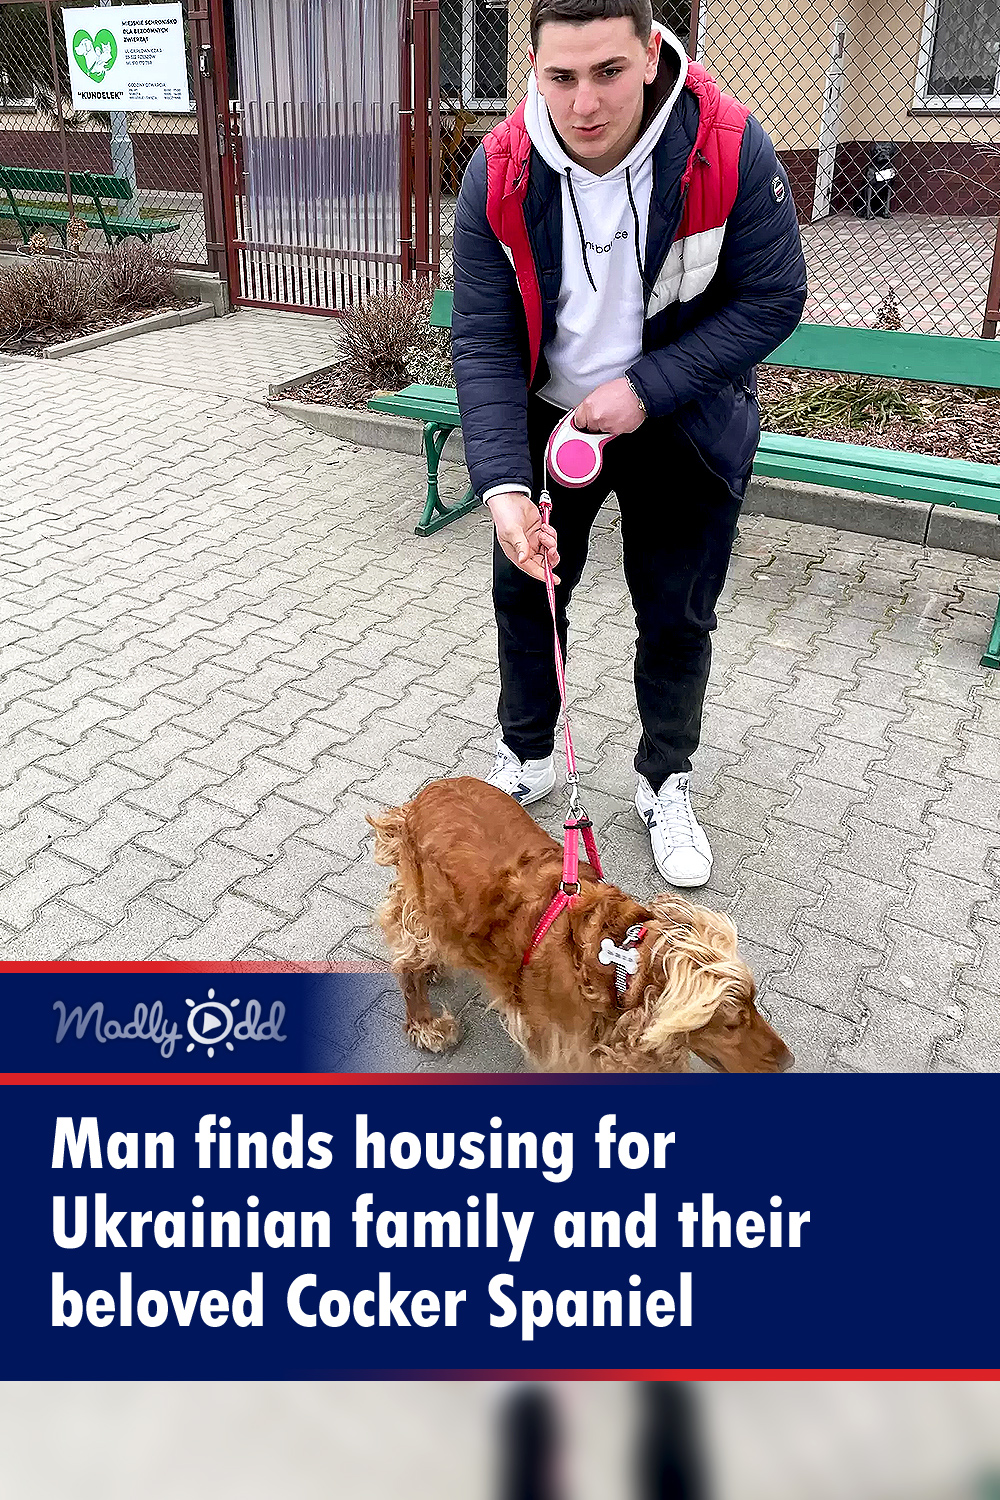 Man finds housing for Ukrainian family and their beloved Cocker Spaniel